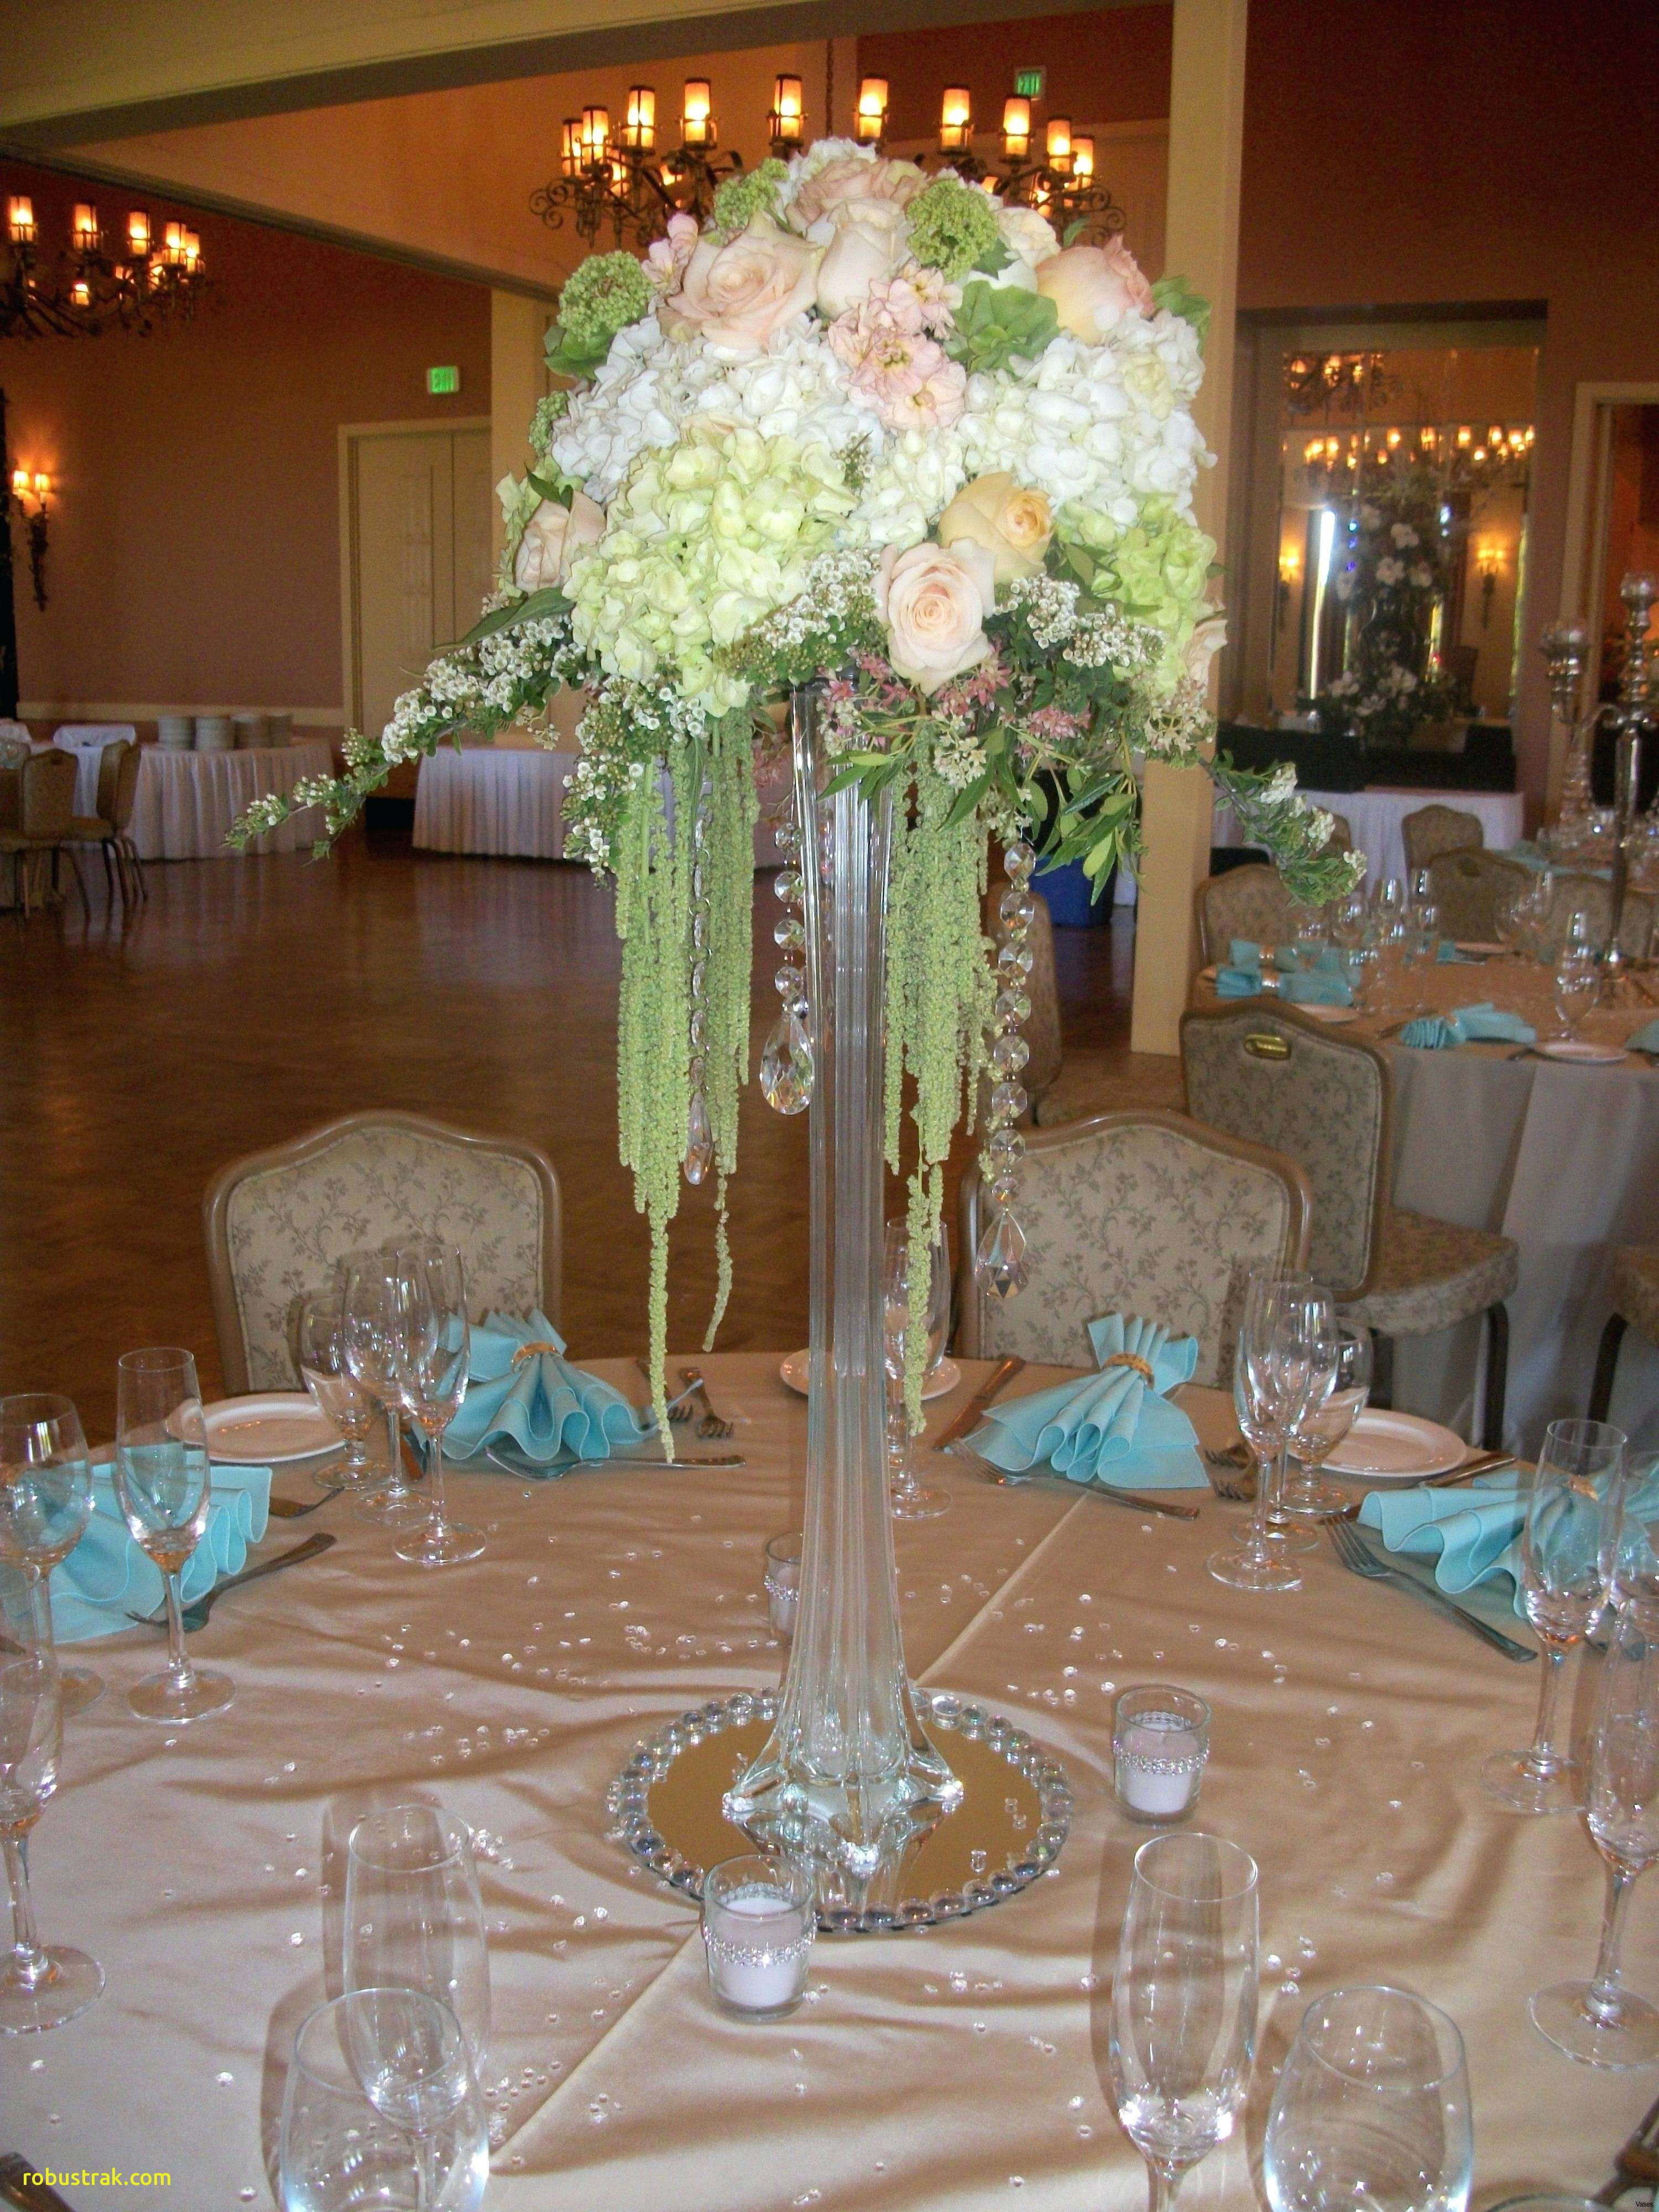 22 attractive Tall Centerpiece Vases for Sale 2022 free download tall centerpiece vases for sale of awesome fall wedding decorations for sale home design ideas within eiffel tower vases for sale australia gold 24 whiteh whitei 0d inch inspiration of sell 